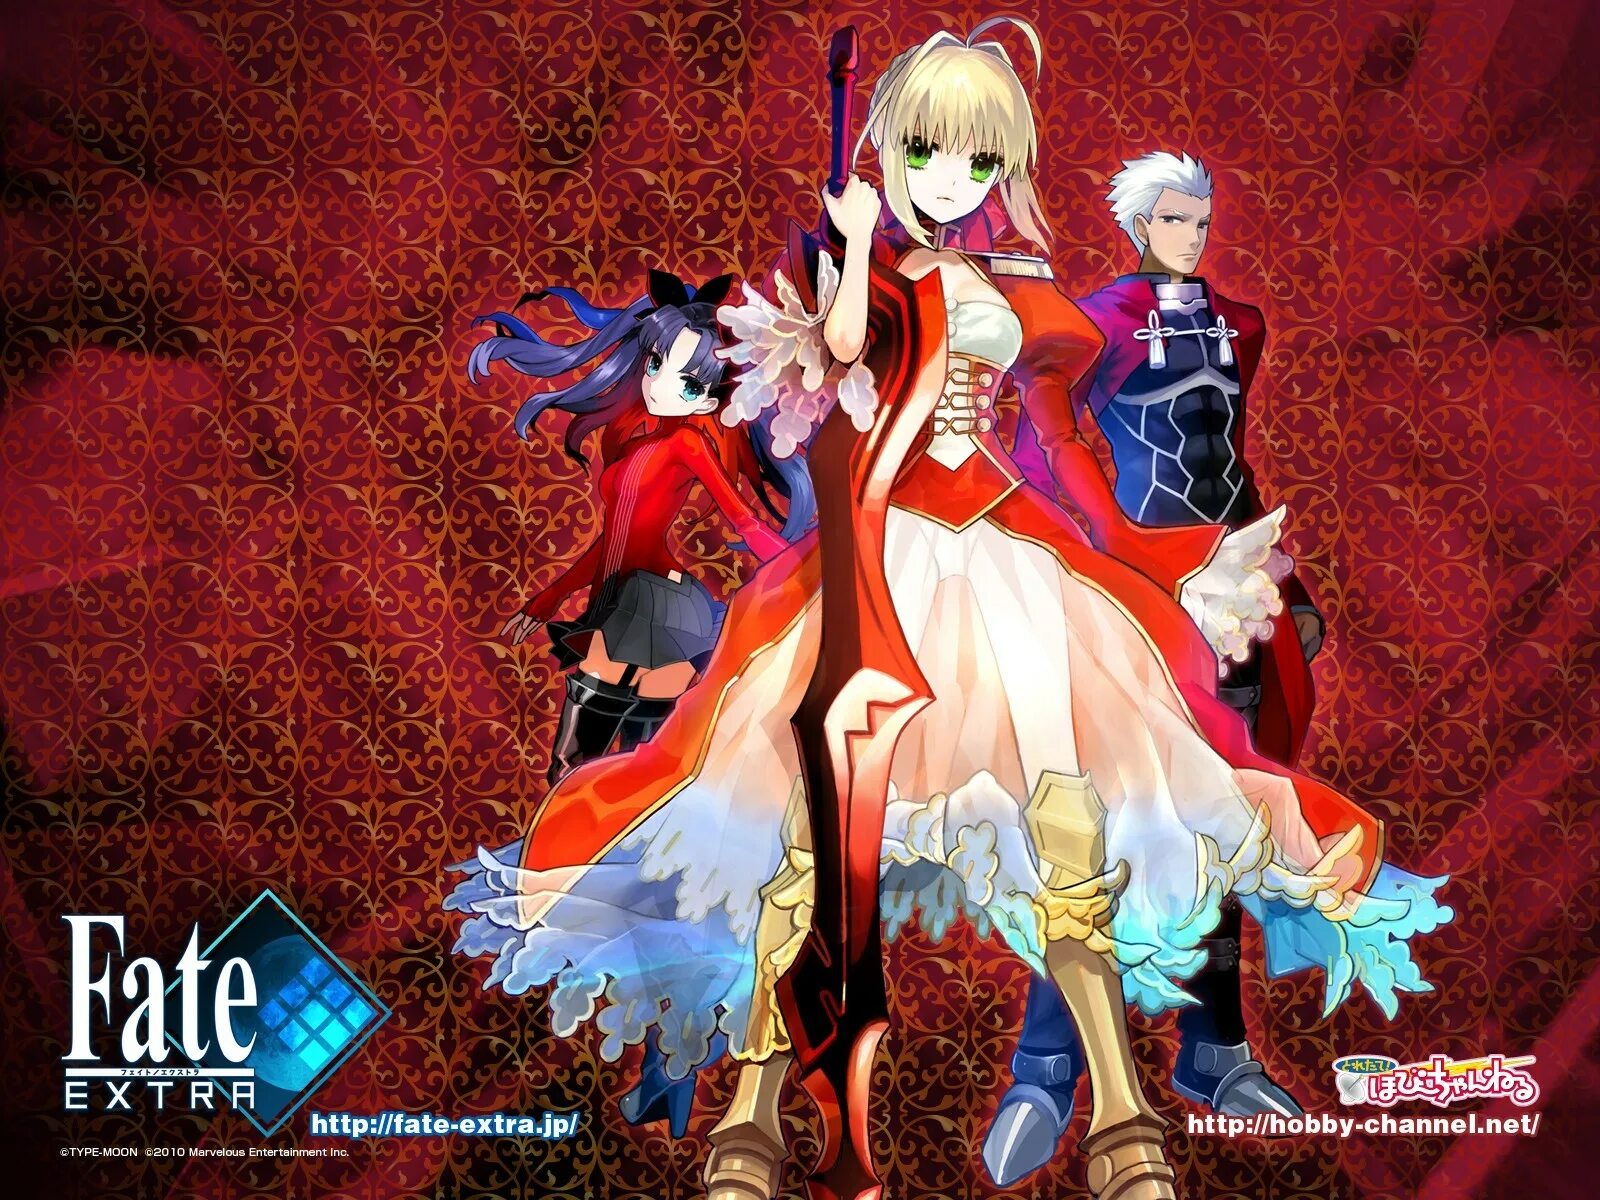 Fate Extra record. Fate Extra game. Fate Extra Gameplay. Fate Extra геймплей. Fate g i dle текст